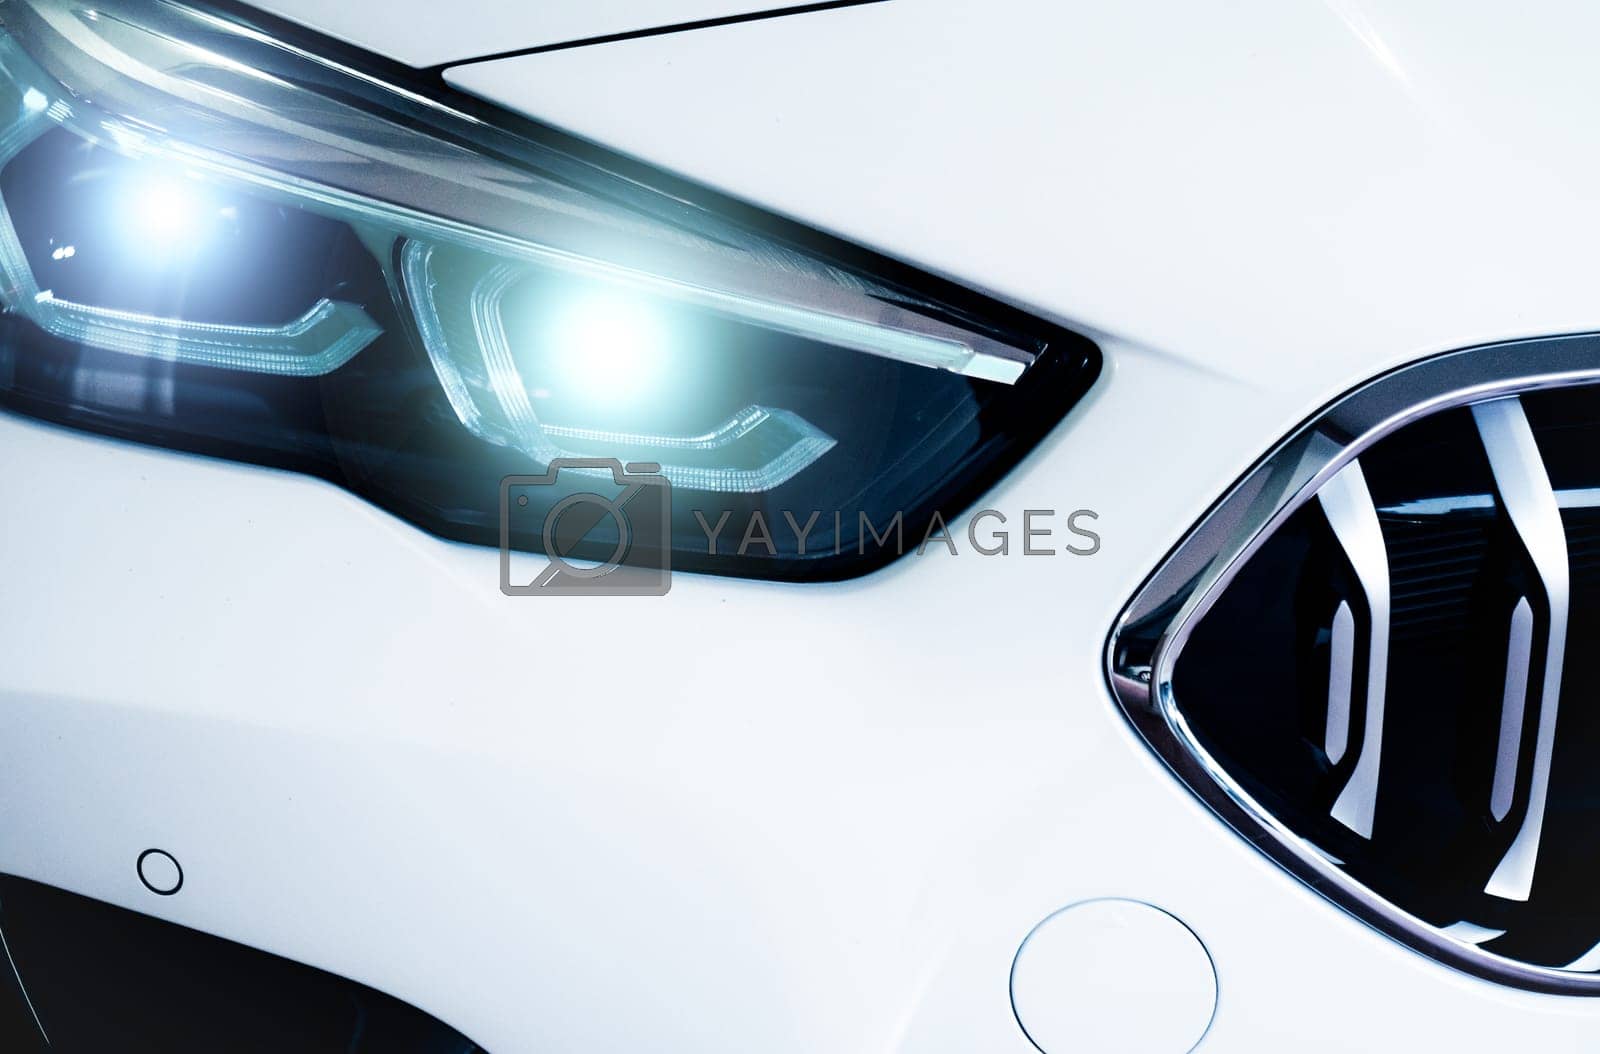 Royalty free image of Closeup headlamp light of a white luxury car. Automotive industry concept. Electric car or hybrid vehicle concept. Automobile leasing and insurance concept. Auto leasing business. Electric vehicle. by Fahroni